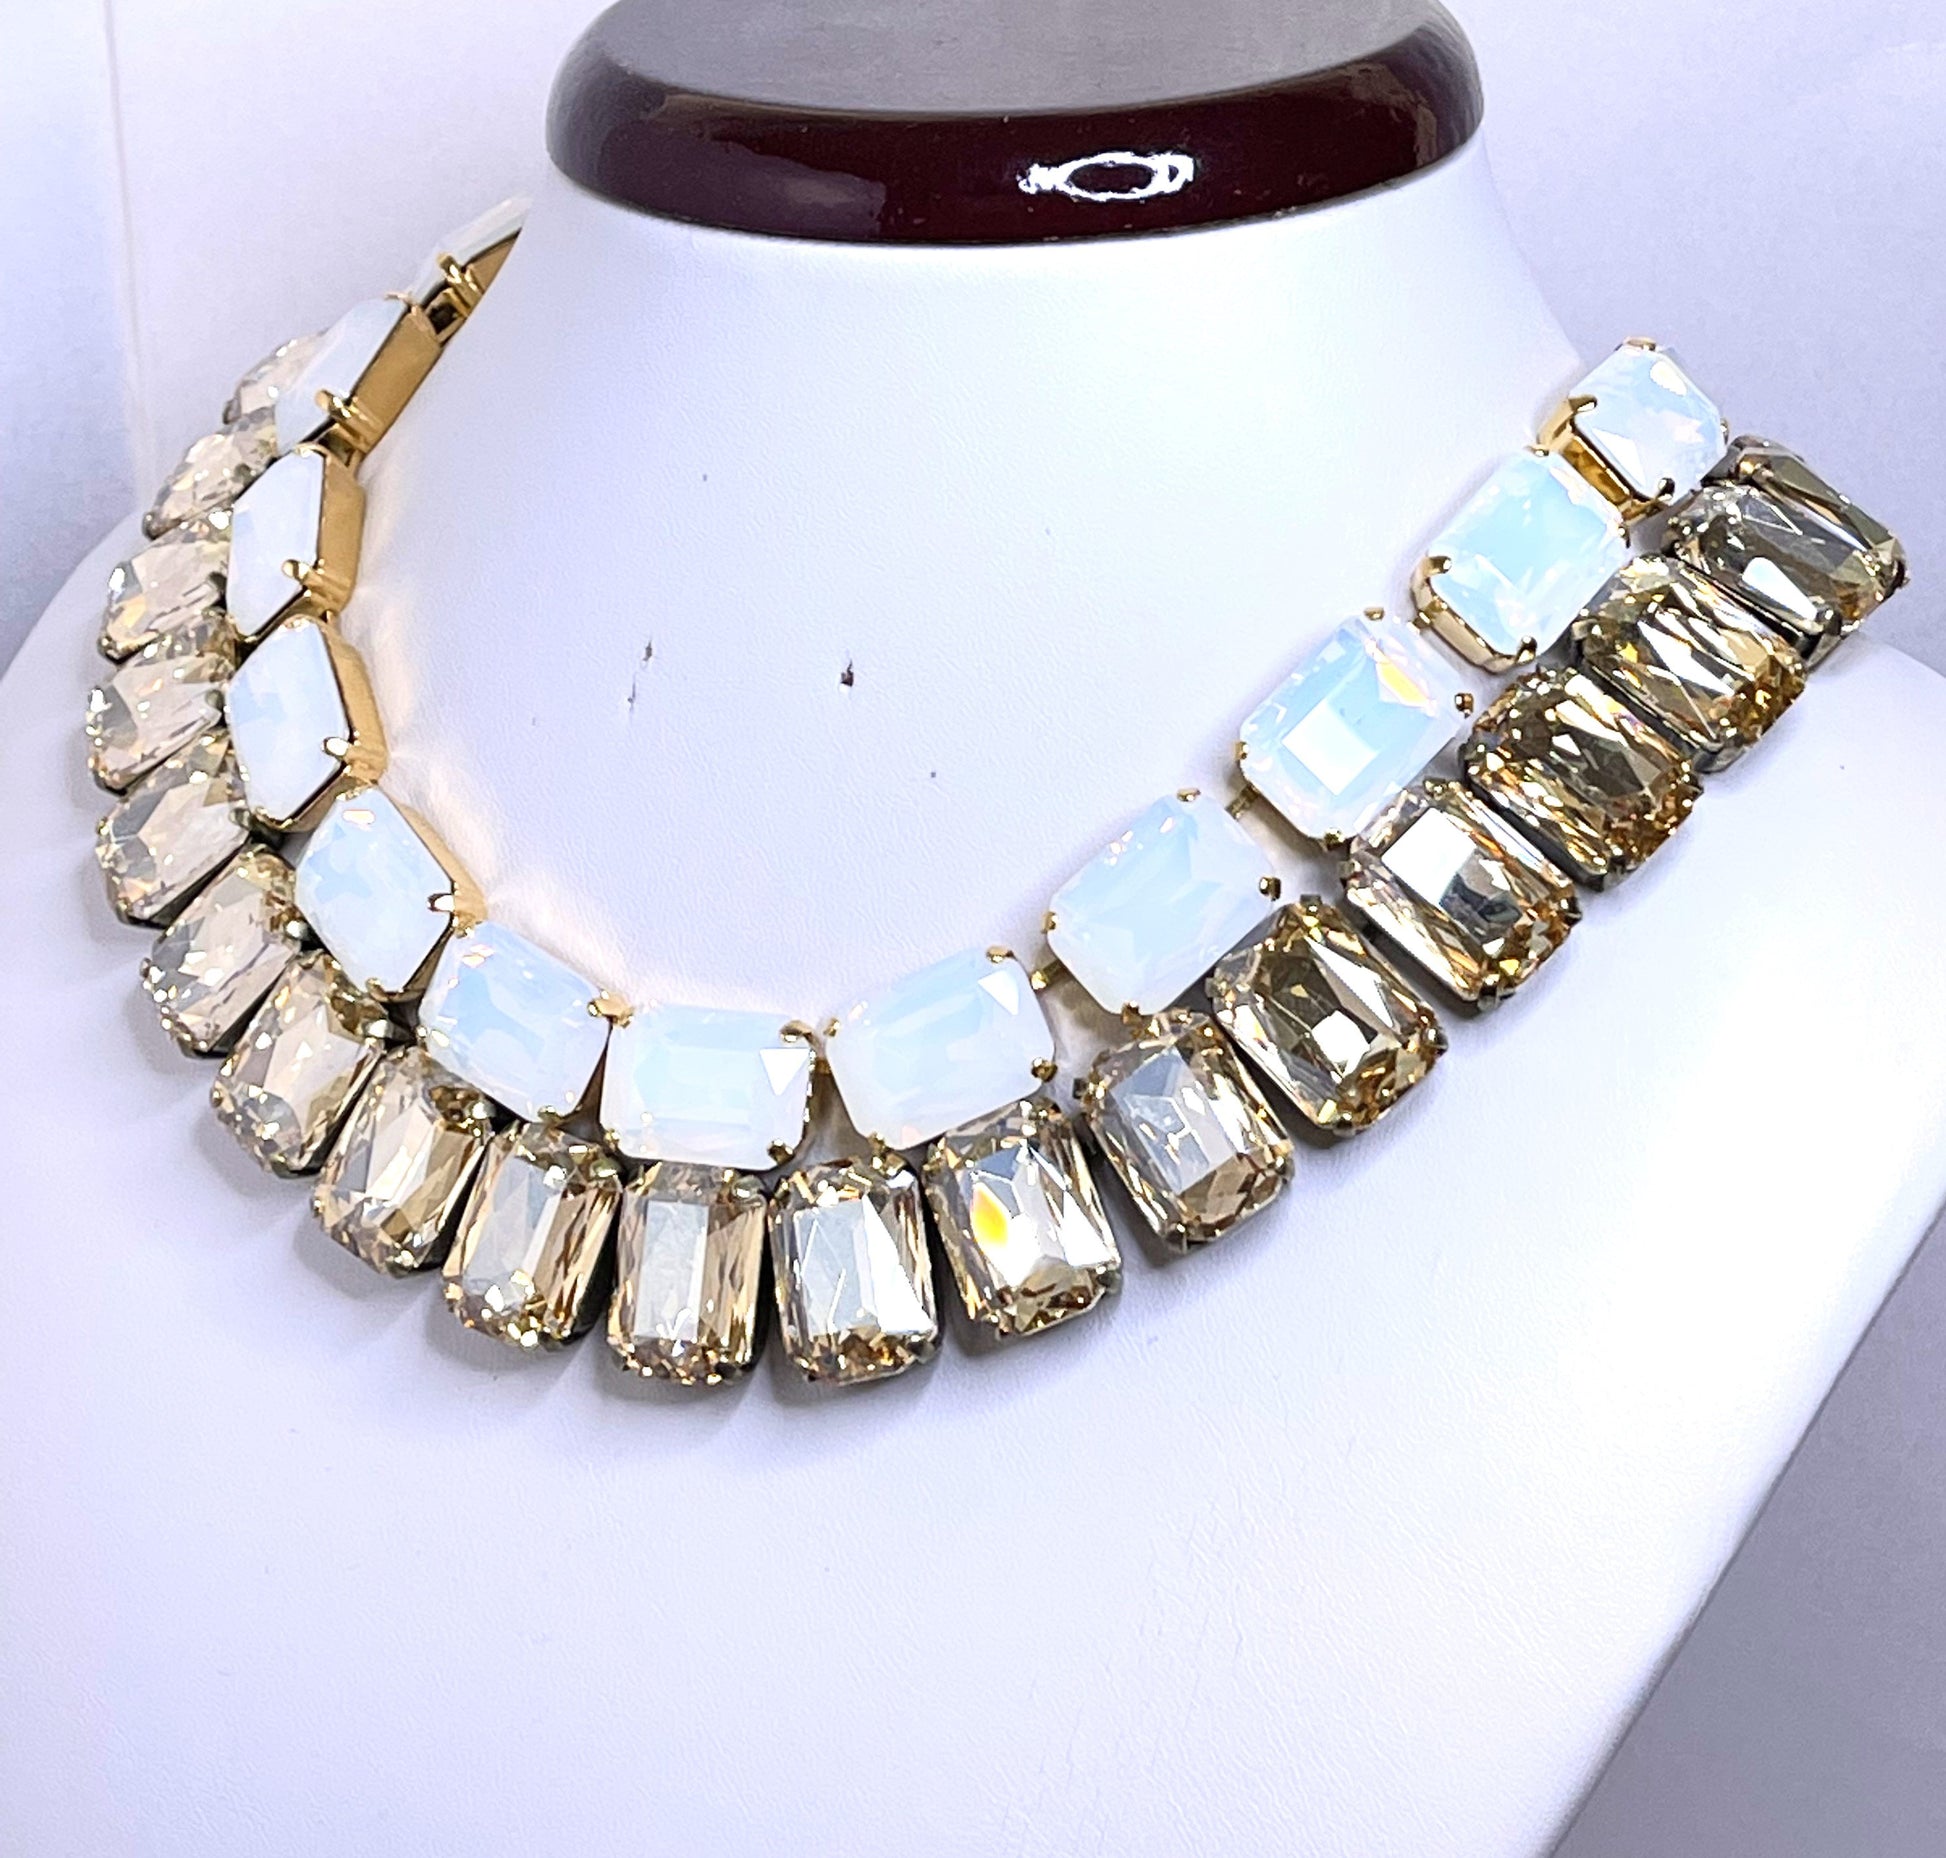 White Opal Crystal Necklace, Wedding Jewellery, Light Silk Crystal Choker, Statement Necklace, Mariana Style, Necklaces for Women